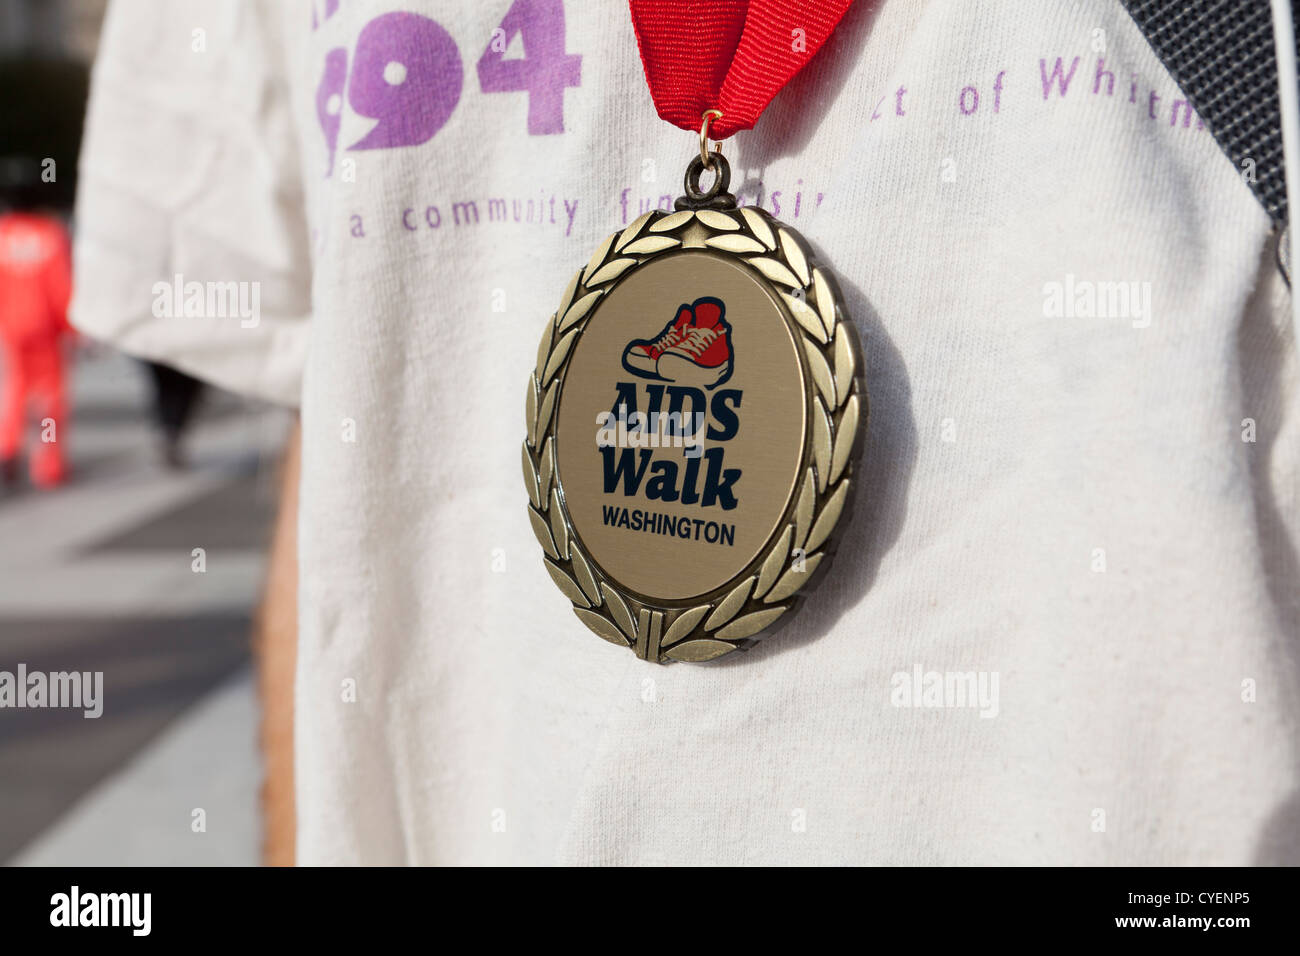 National AIDS Walk medal Stock Photo